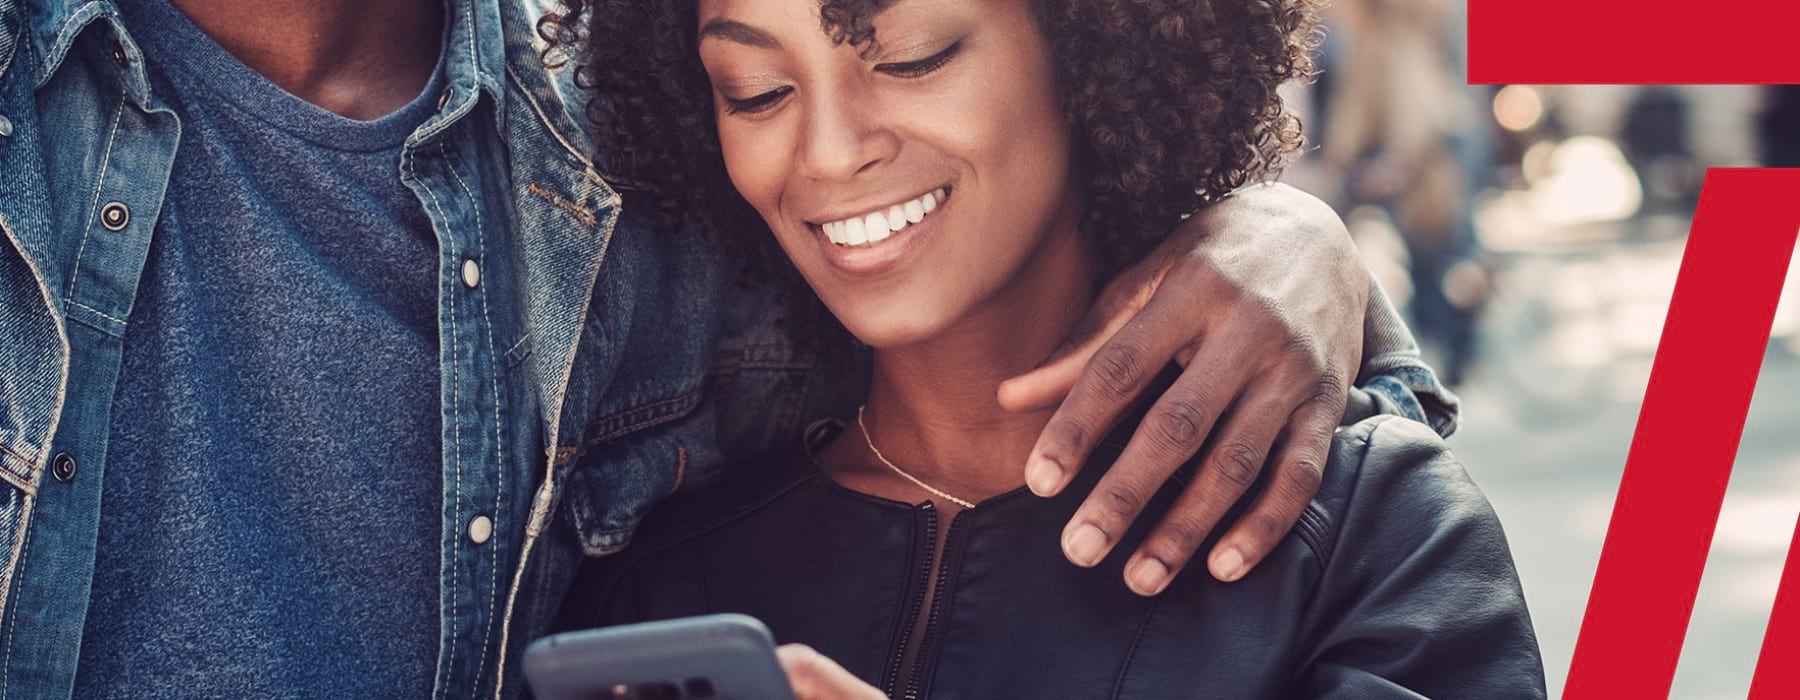 lifestyle image of a woman smiling while looking at her device